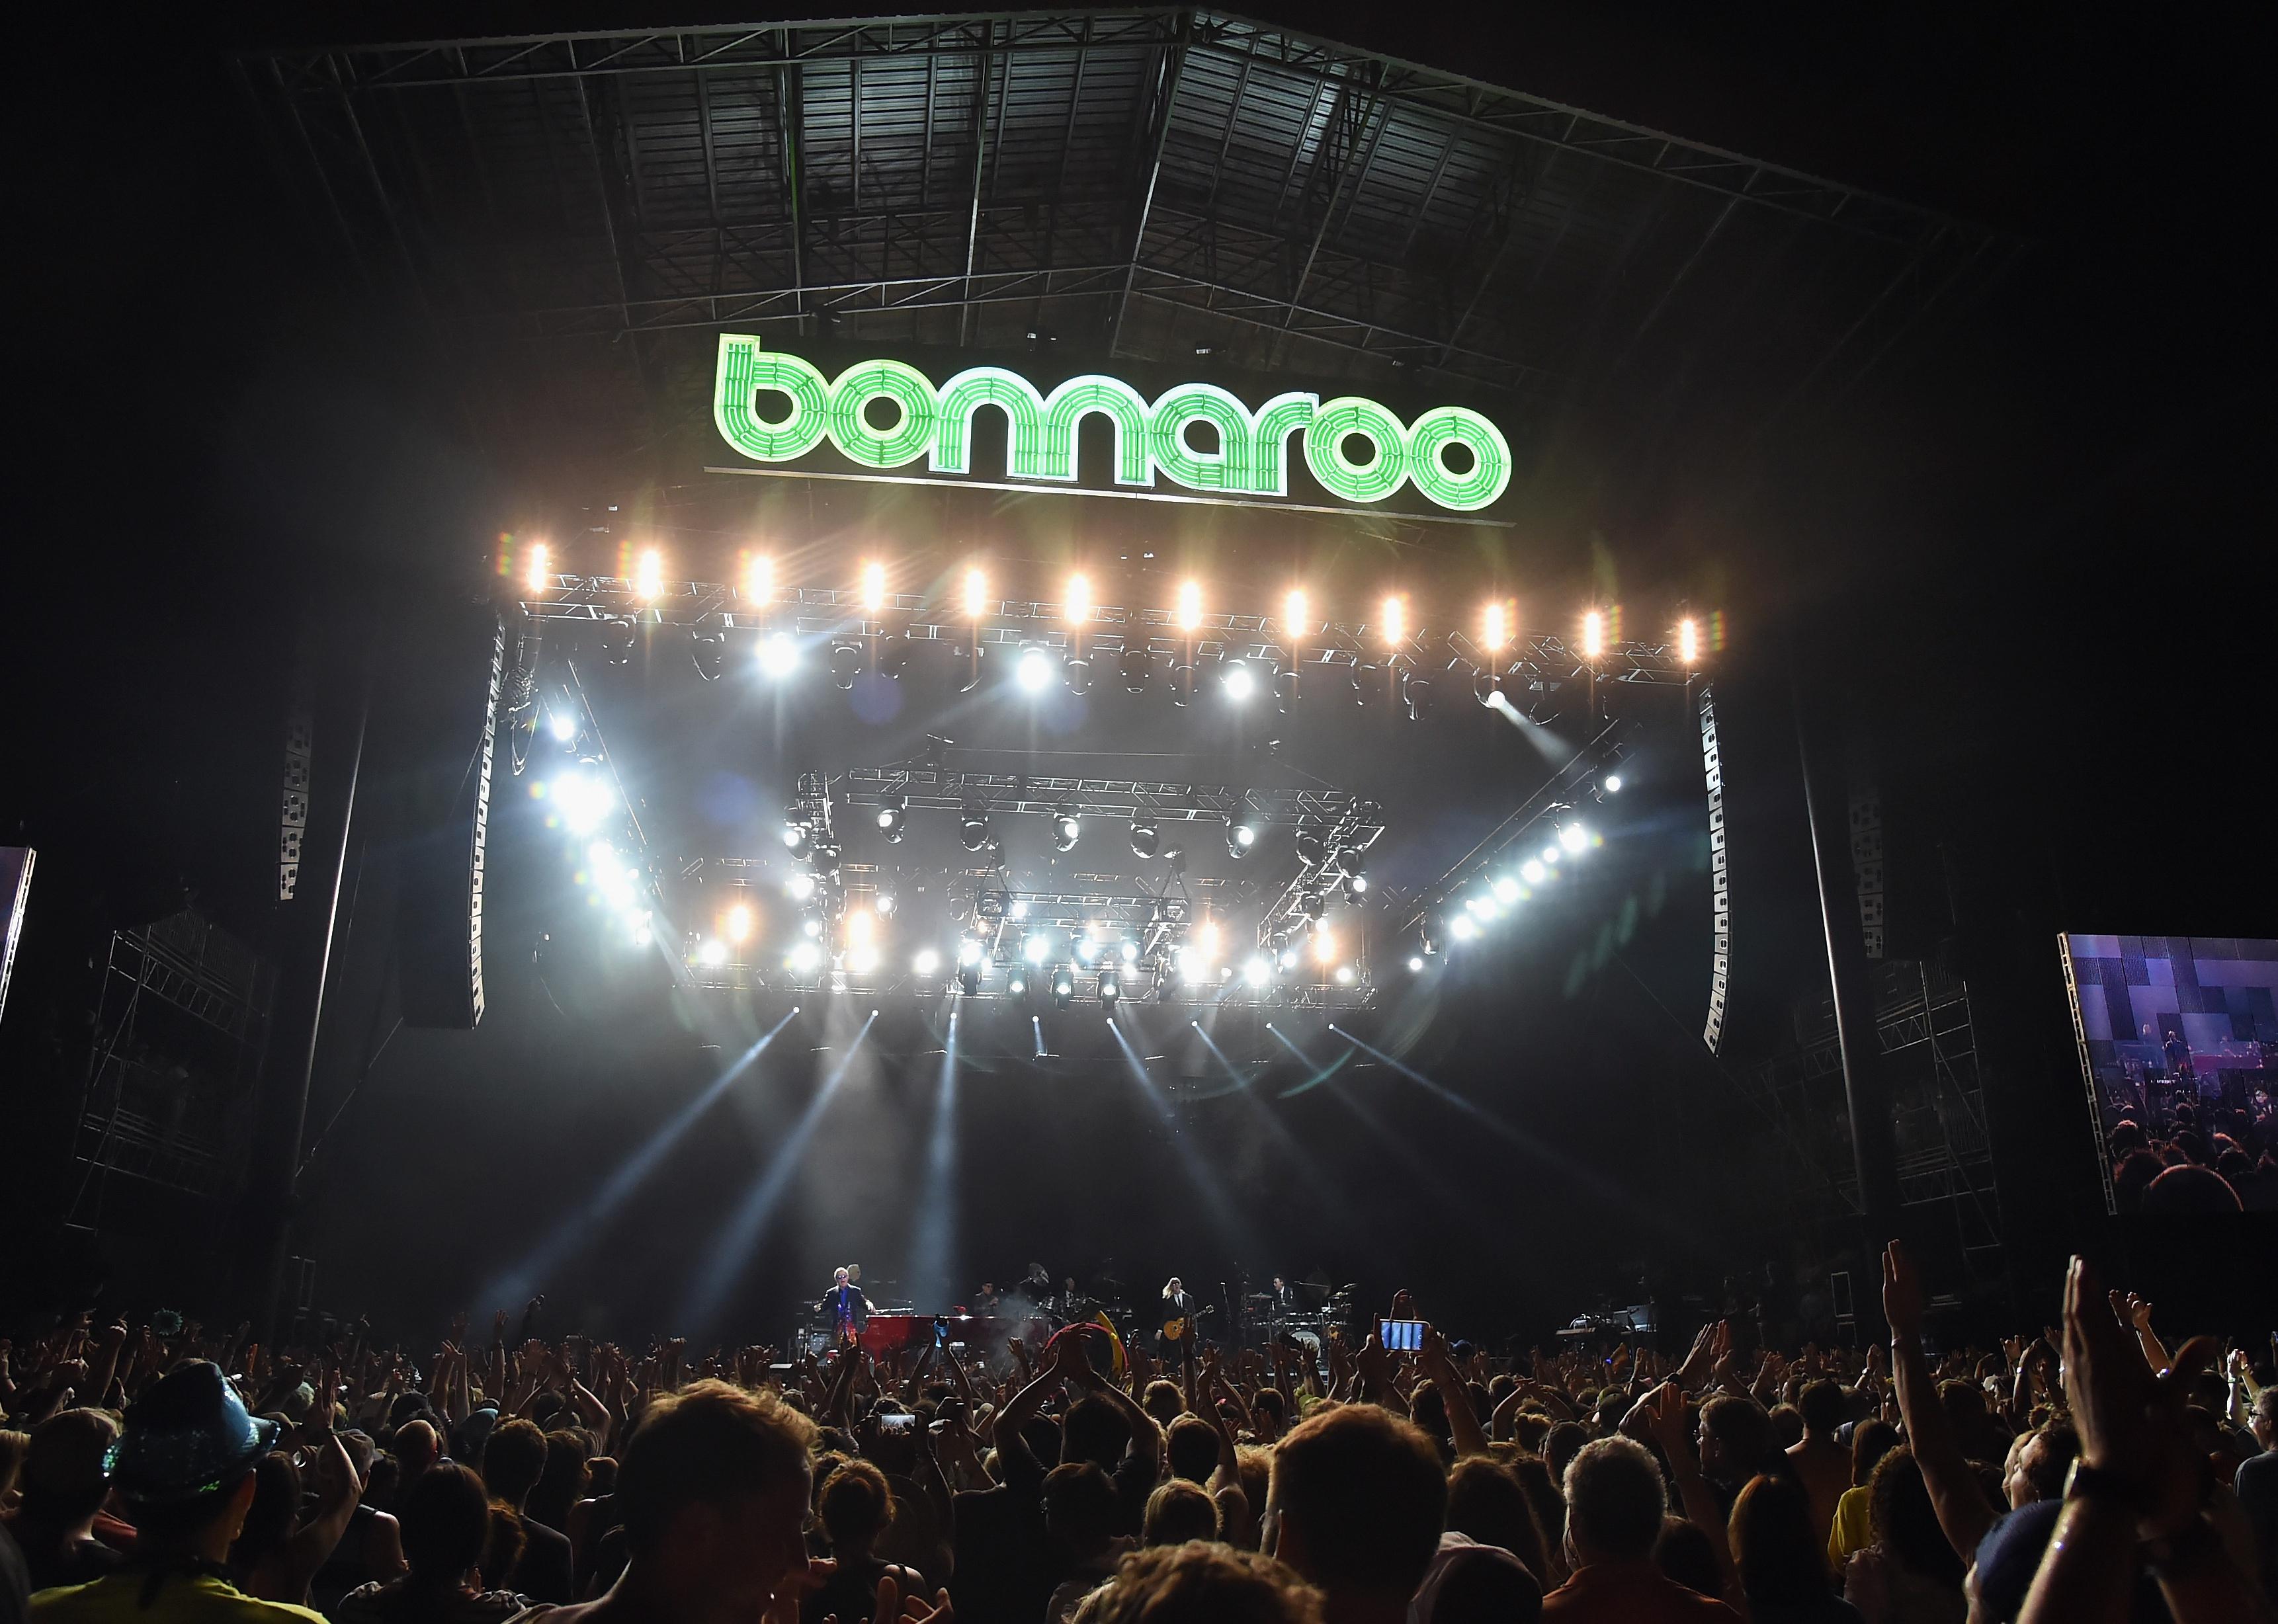 Sir Elton John performs onstage at What Stage during day 4 of the 2014 Bonnaroo Arts And Music Festival.